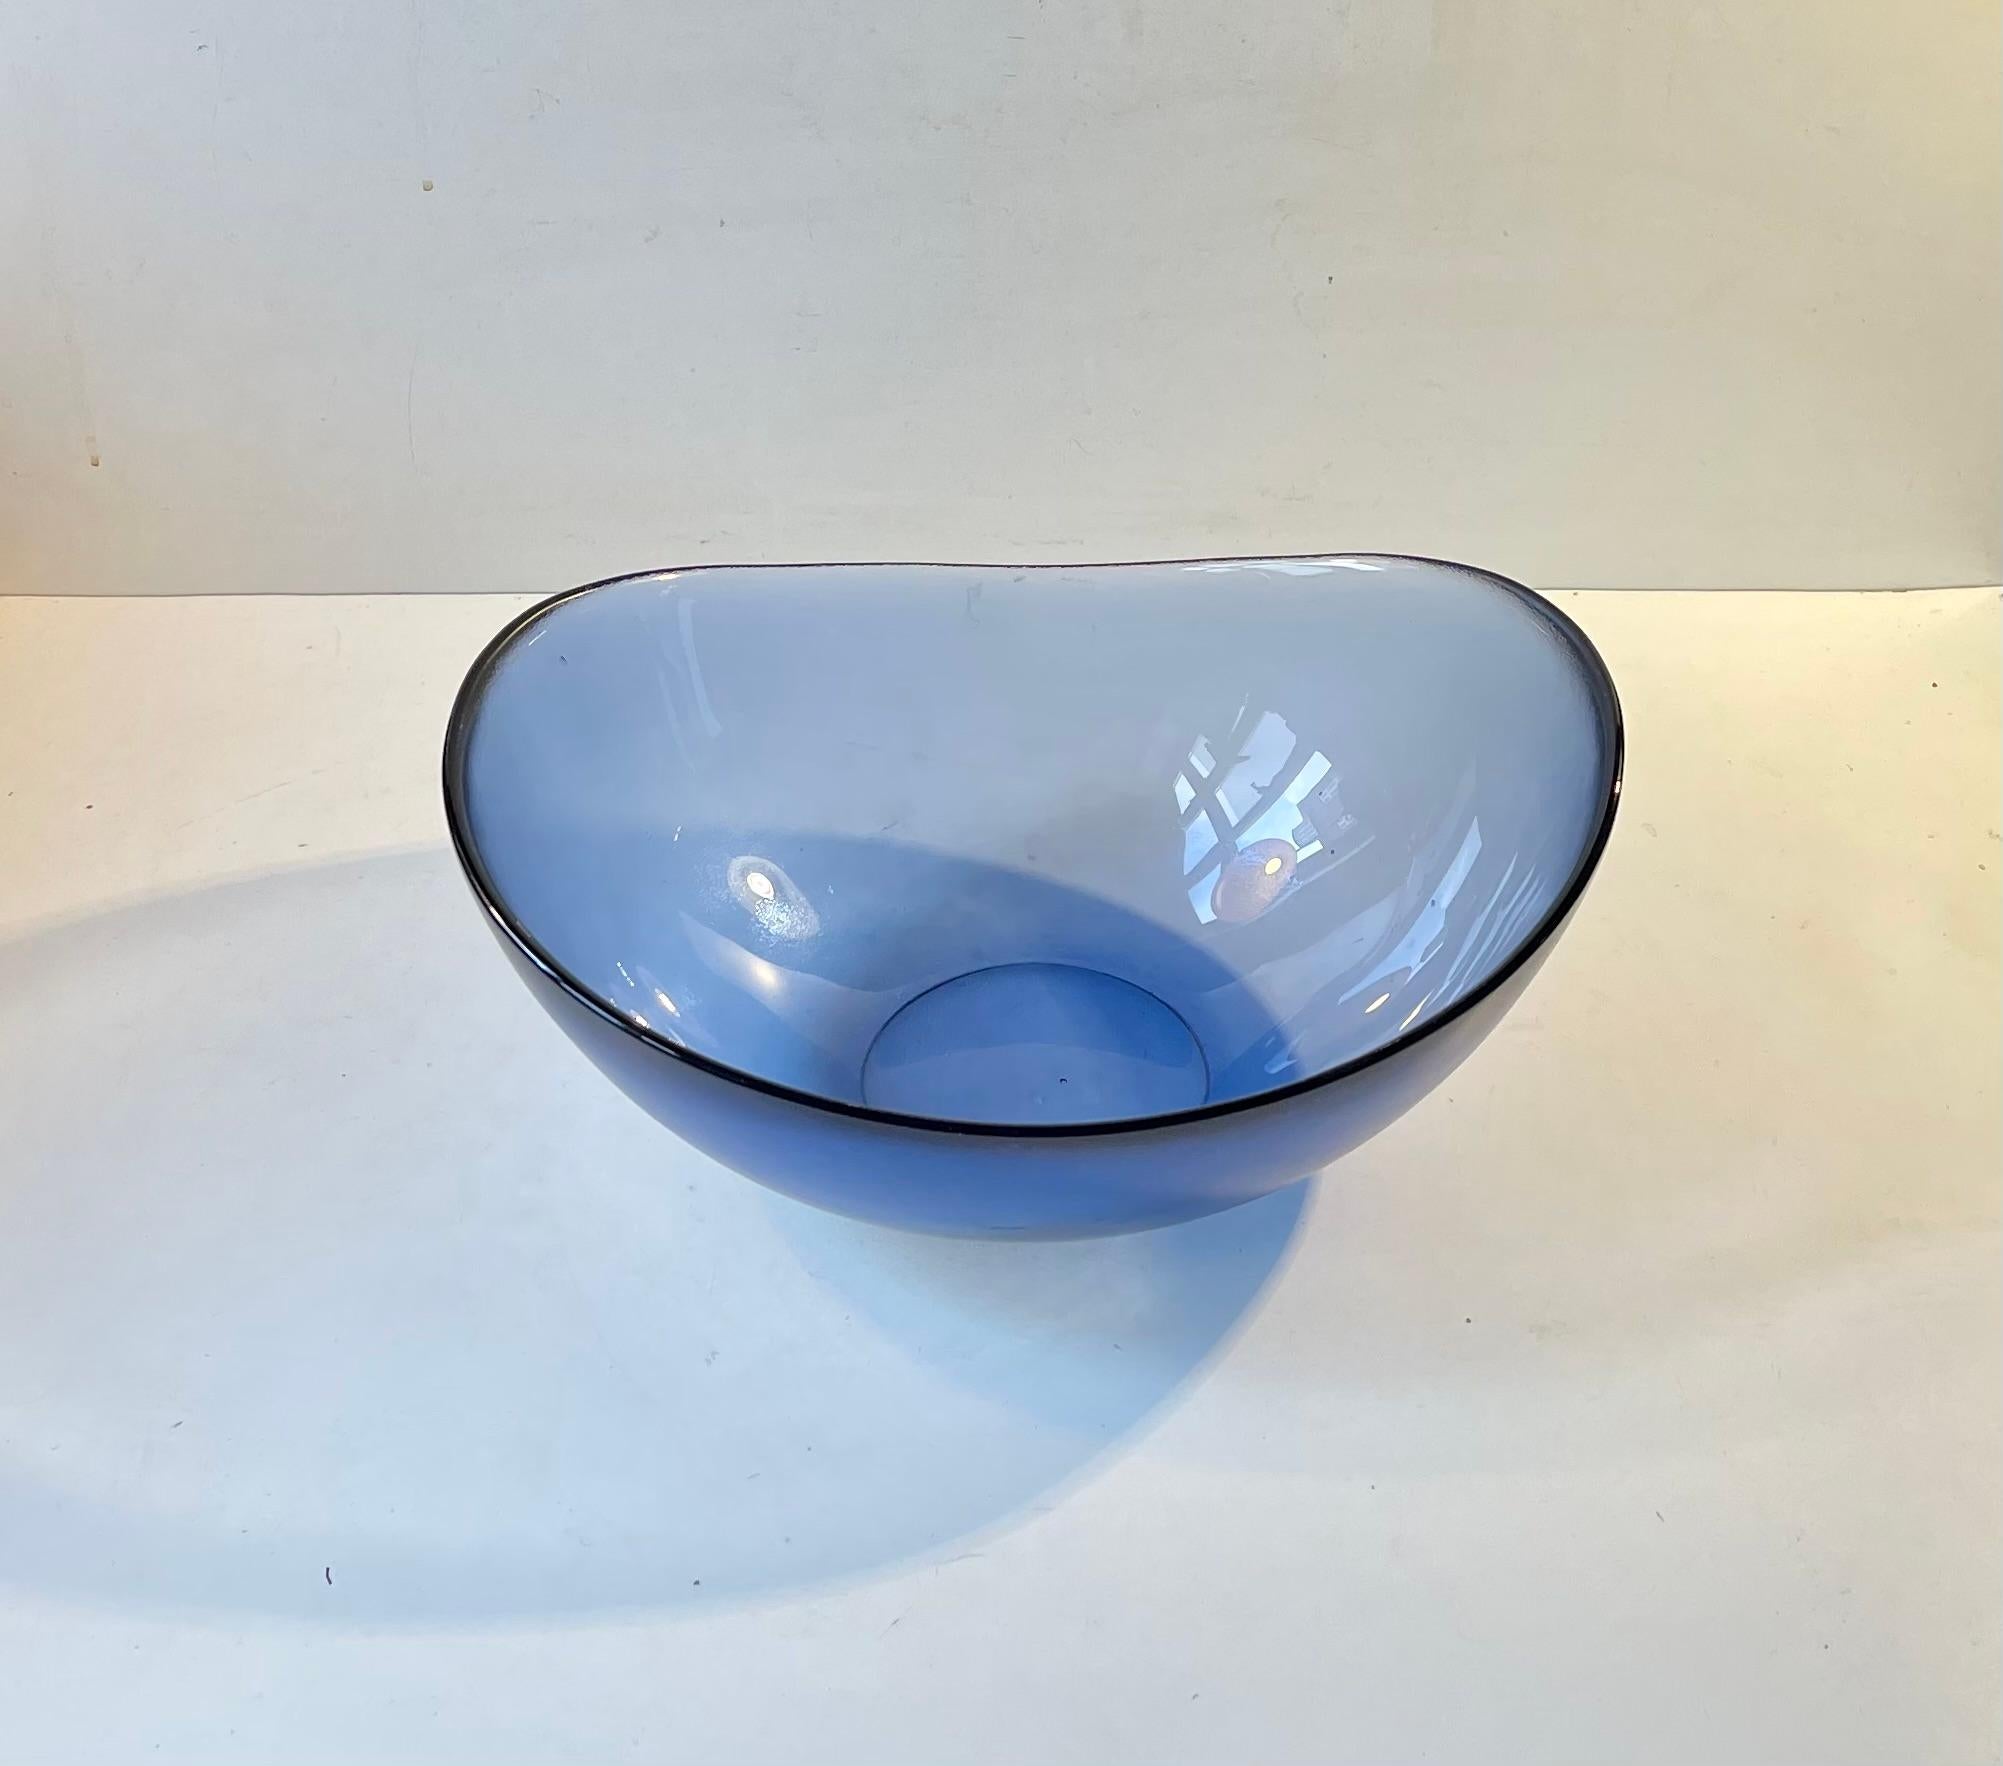 Organically shaped blue bowl designed by Per Lütken during the 1980s and manufactured at Holmegaard in Denmark. It is called Verona and this one is the largest in the series. It features a micro-textured/uneven exterior and a bright contrasting